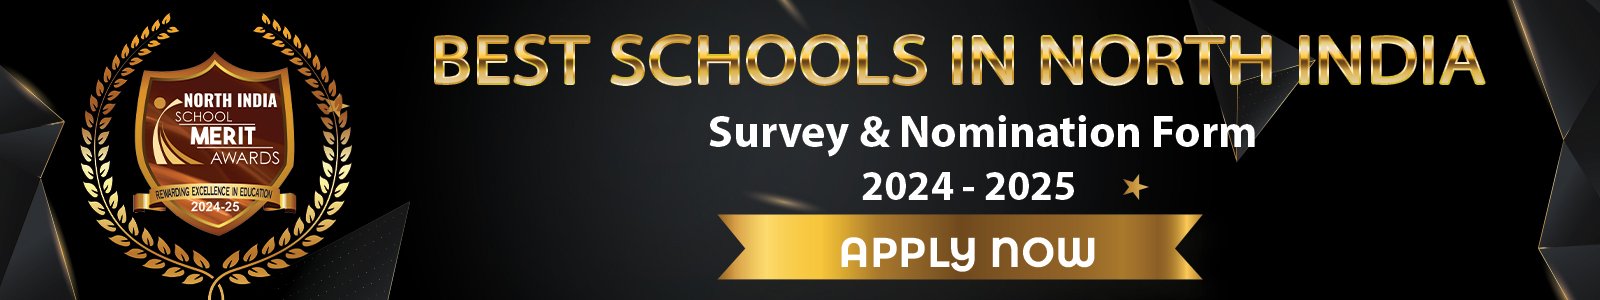 Survey-Form-Open-For-North-India-School-Rankings-2024